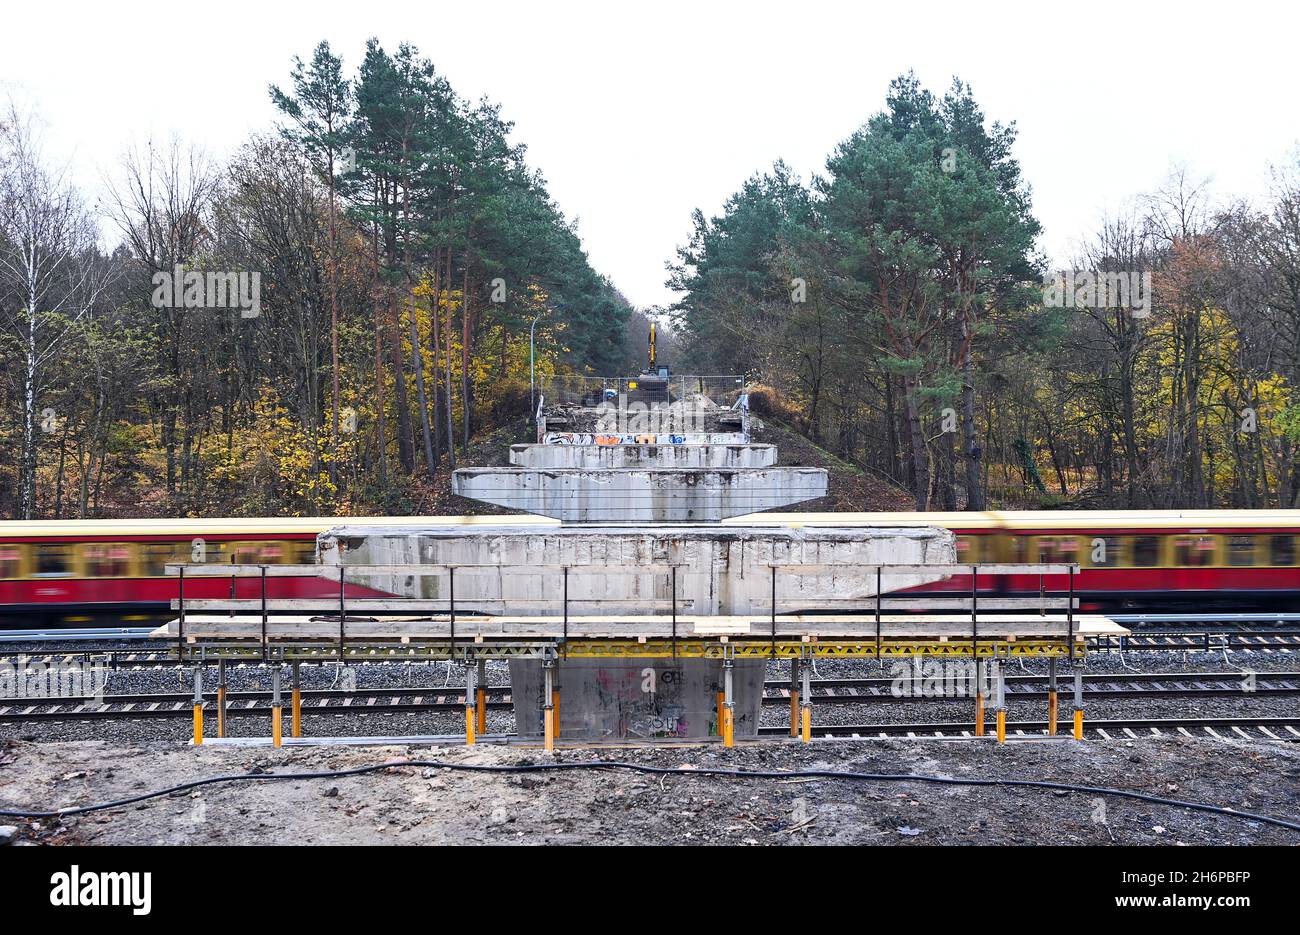 17 November 2021, Brandenburg, Hohen Neuendorf: A suburban train passes between the supporting pillars of the former bridge of the L 171 state road. The bridge between Hohen Neuendorf and Bergfelde, built in the 1960s, had to be demolished because damage to the prefabricated prestressed concrete girders was discovered during a special inspection. According to the Landesbetriebes Straßenwesen, it could not be ruled out that concrete parts would fall onto the tracks or passing trains. It is planned that a temporary bridge will be built in the spring of 2022 year. The individual segments are alre Stock Photo